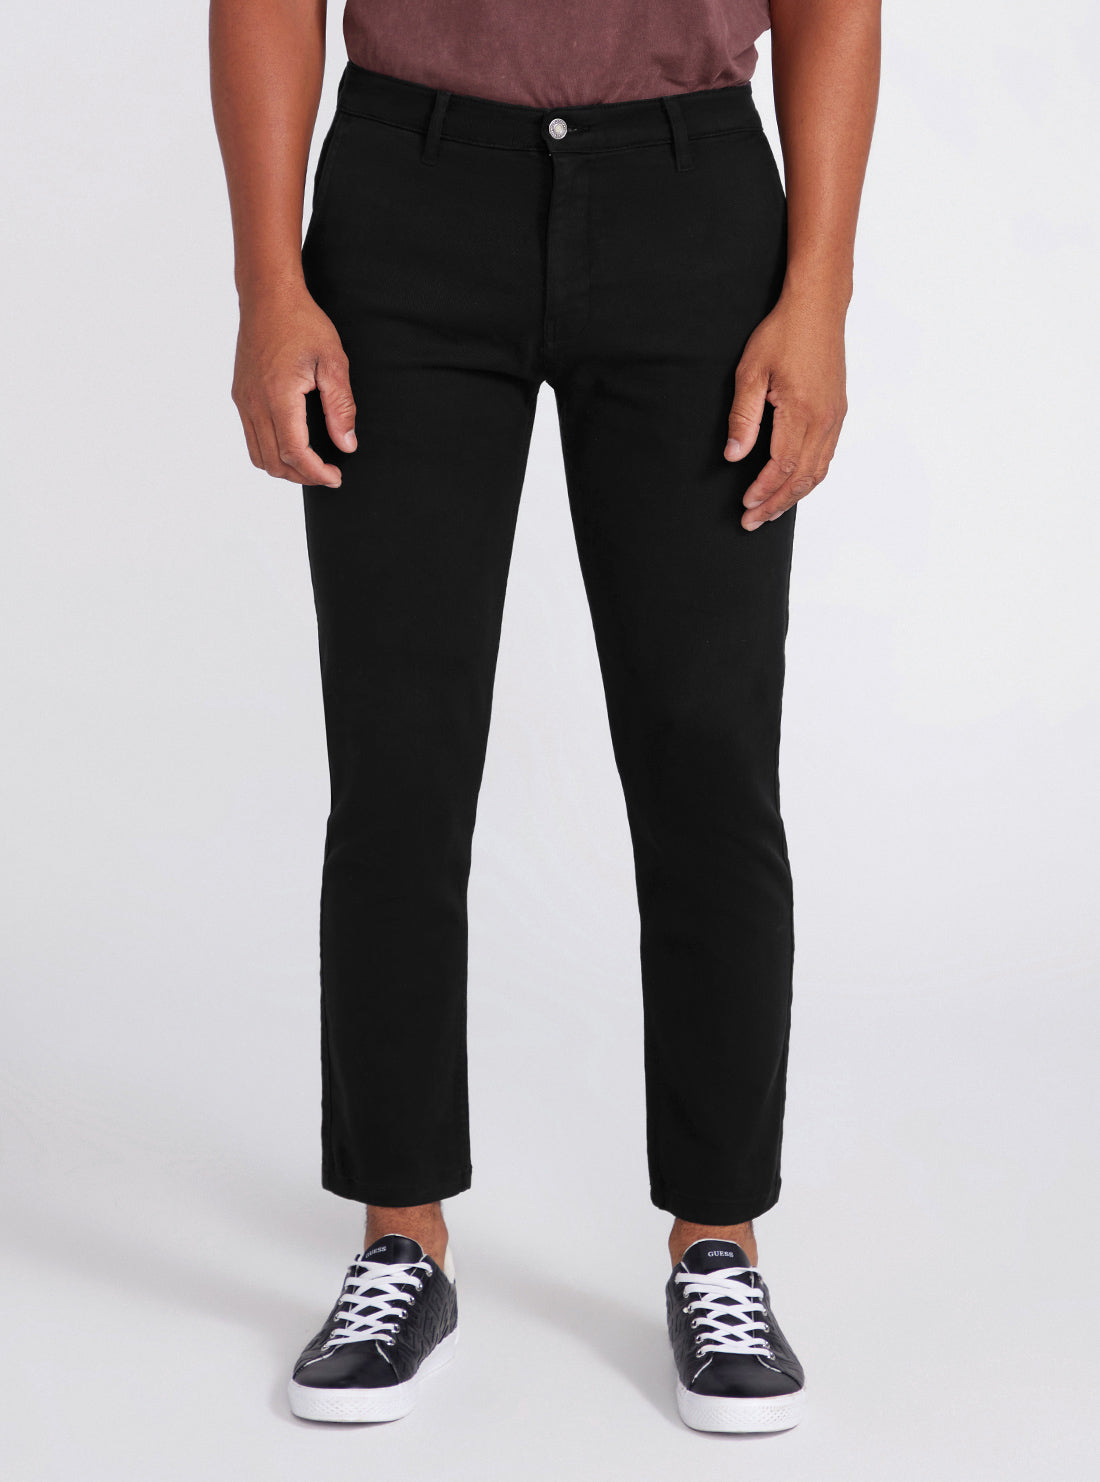 Black Low-Rise Straight-leg Angel Chino Pants | GUESS men's apparel | front view